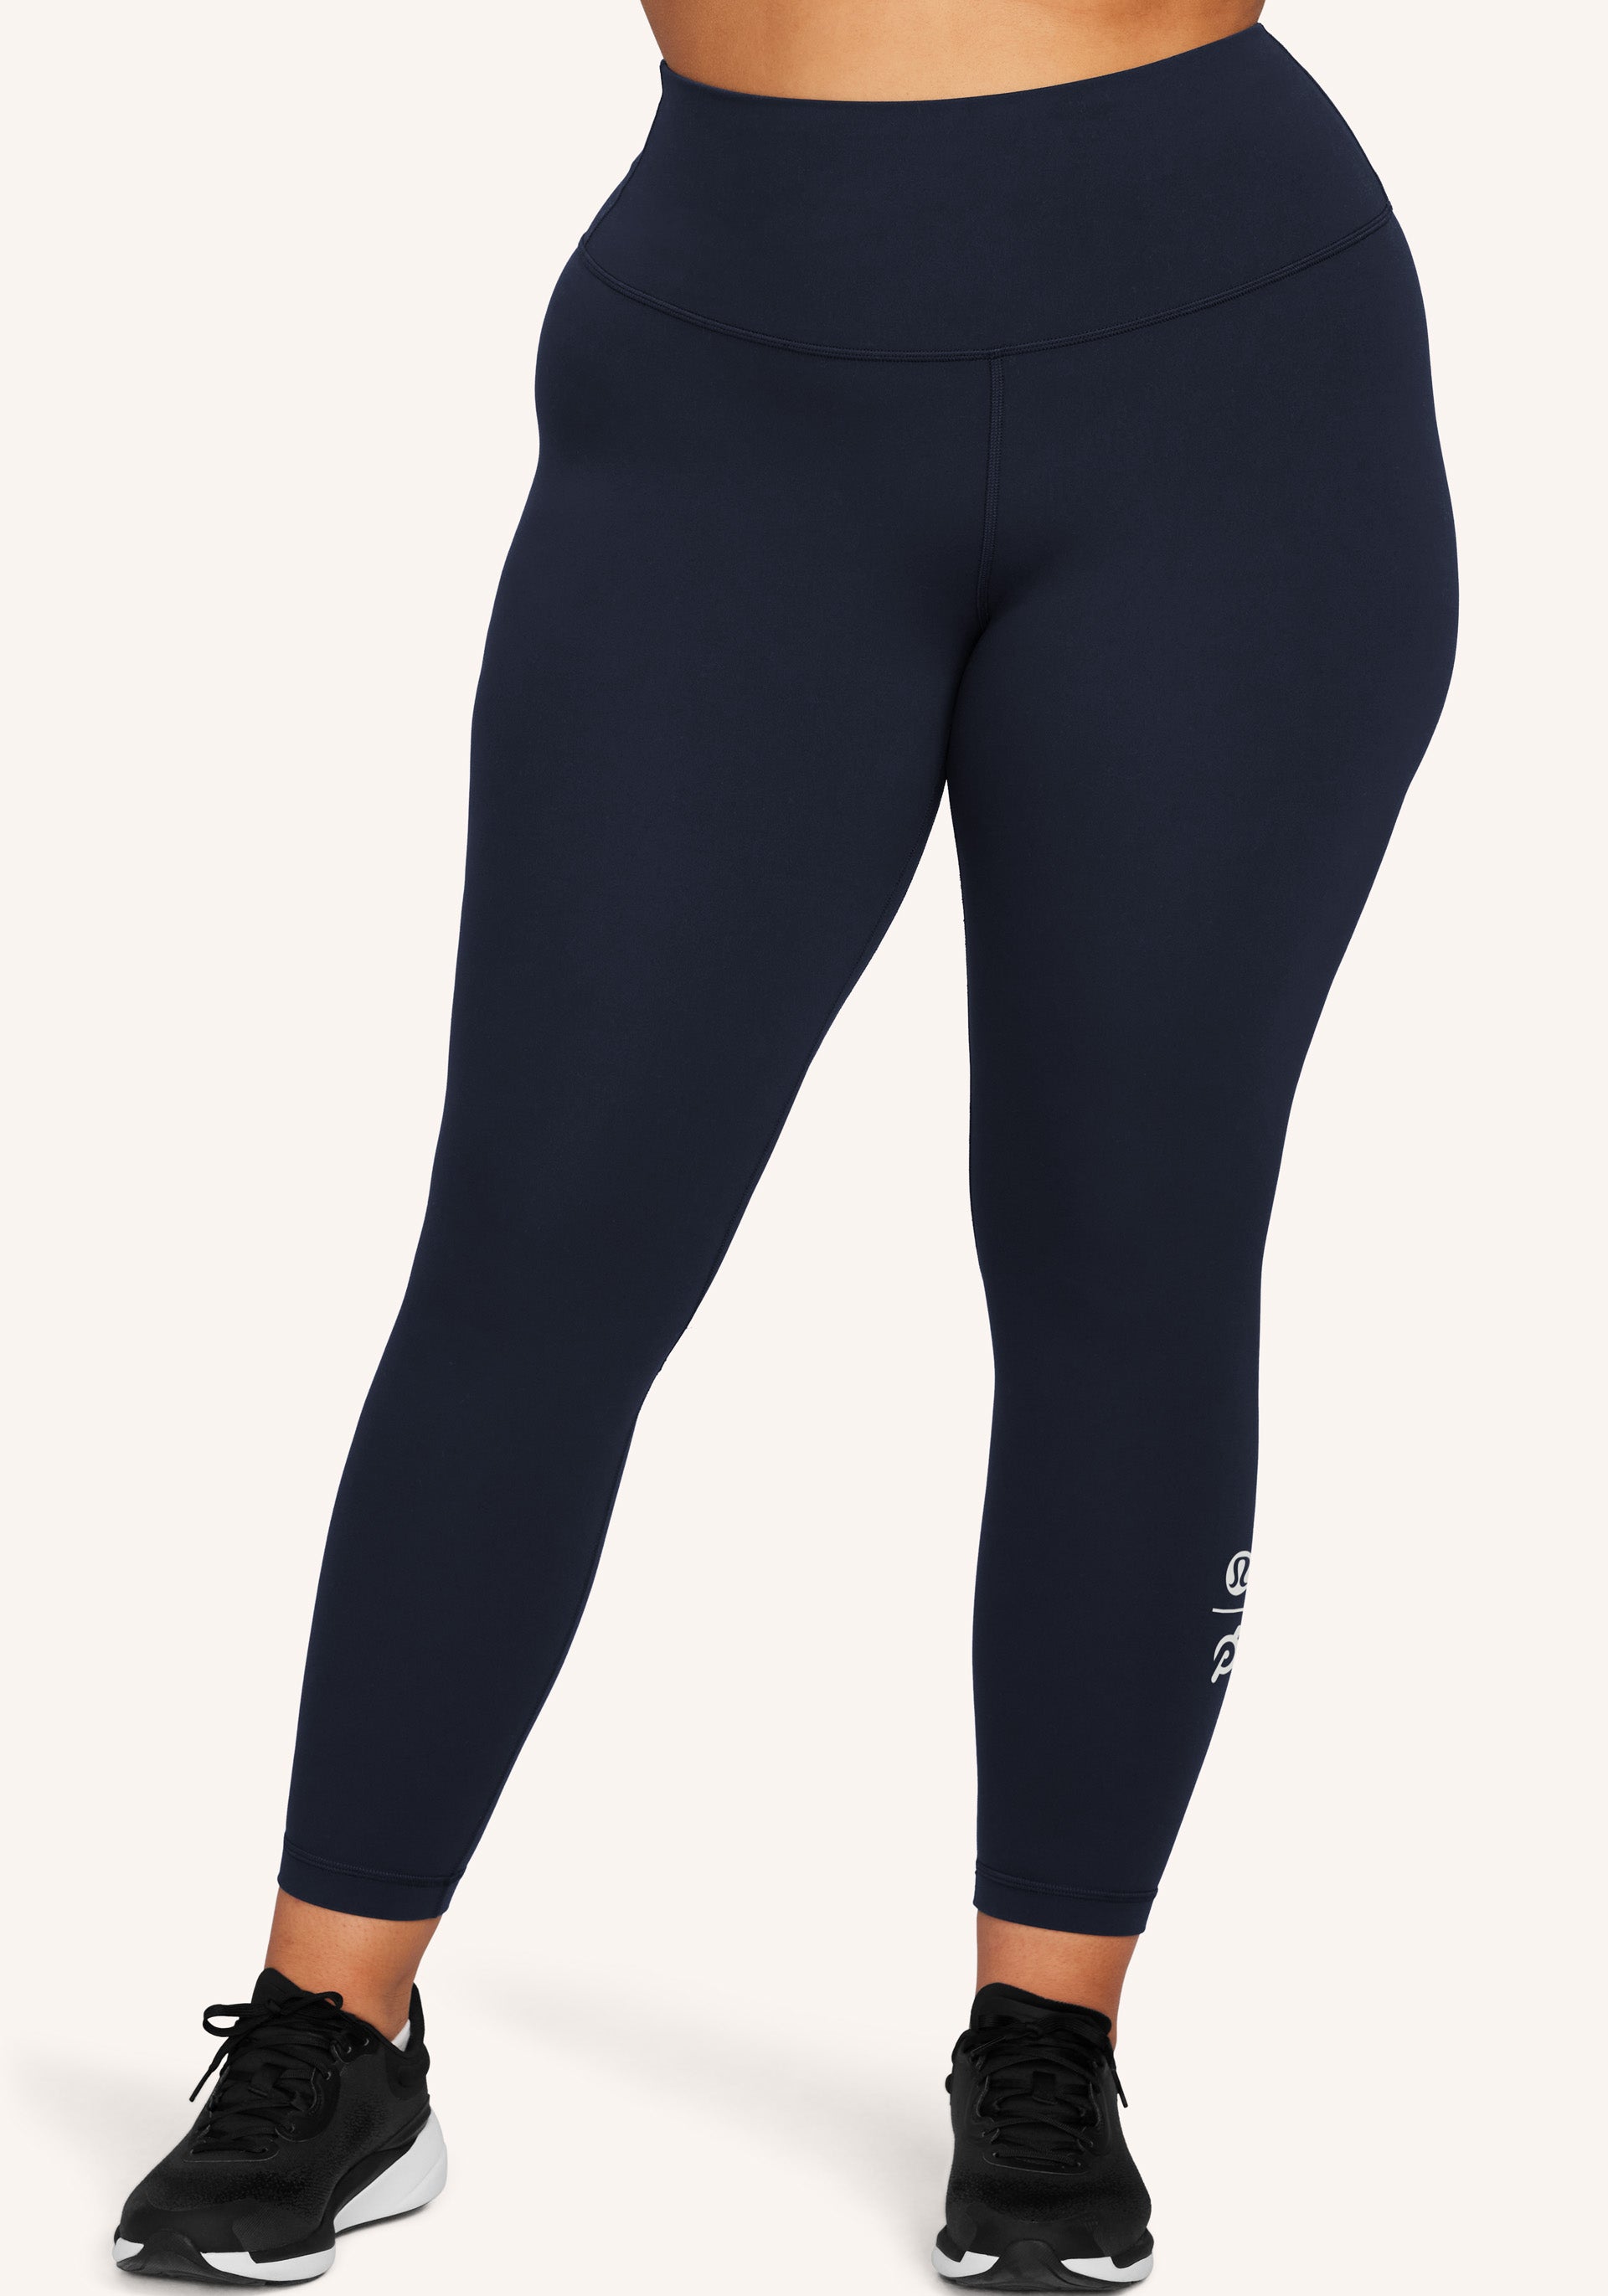 New with tag! Lululemon Align High Rise legging (size 10) 23, Women's -  Bottoms, City of Halifax